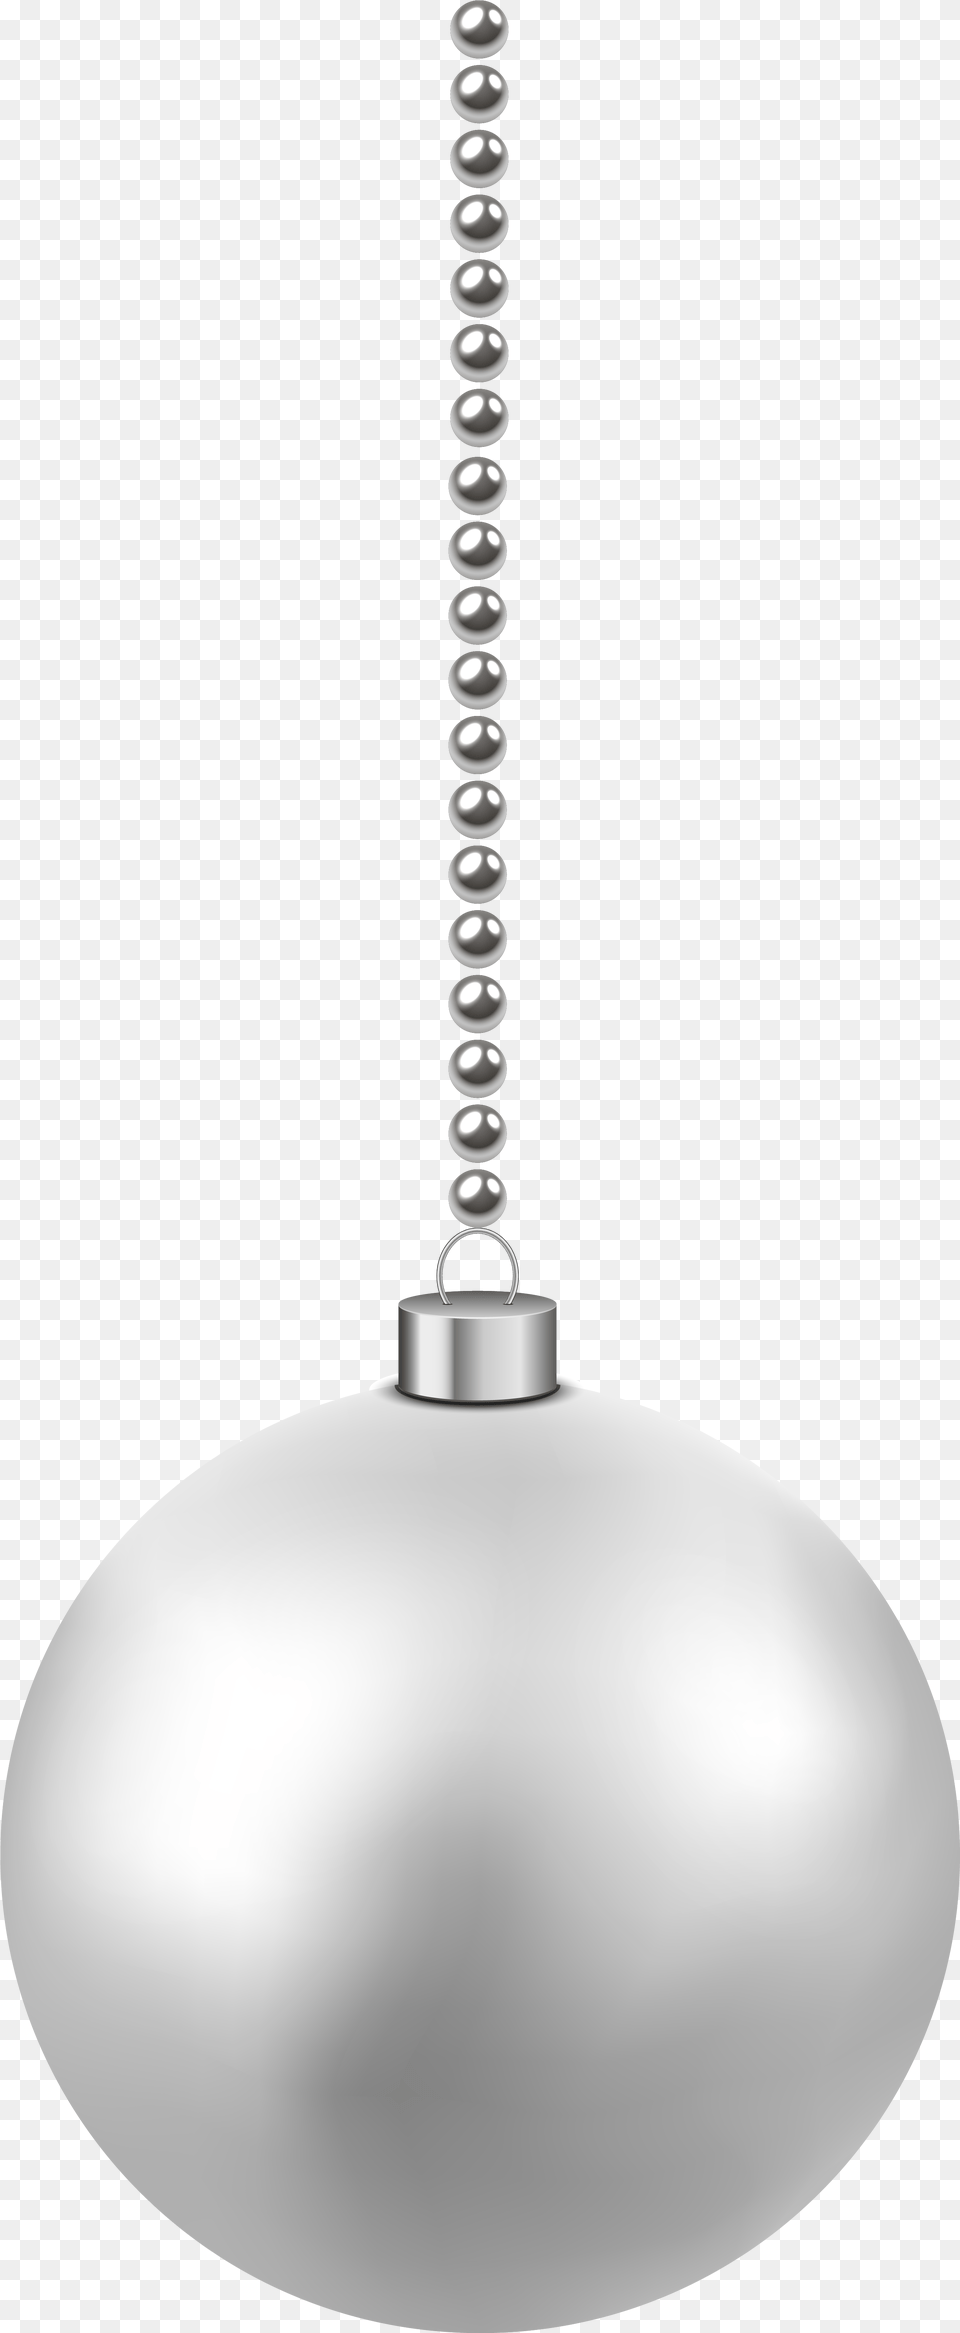 White Christmas Ball Pic Mart Lampshade, Accessories, Jewelry Free Png Download